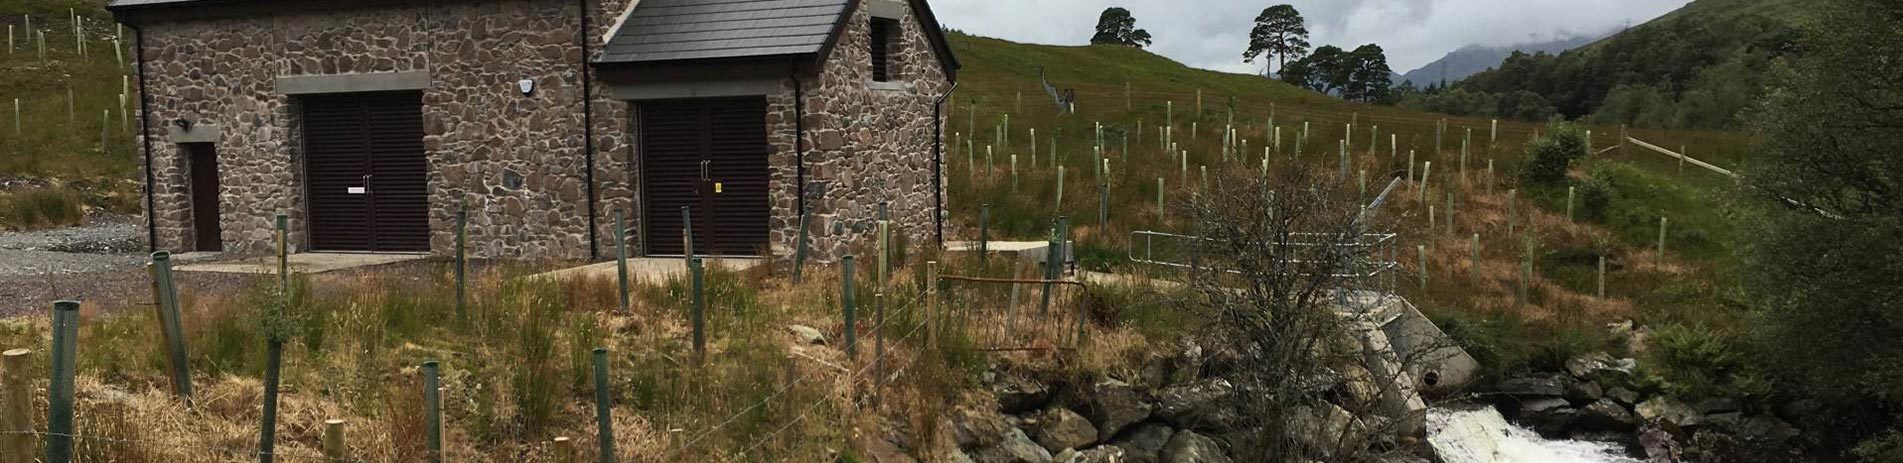 run-of-river-hydro-scheme-beautiful-stone-building-with-sleet-roof-next-to-stream-and-hillside-with-dozens-of-newly-planted-trees-in-tree-guards